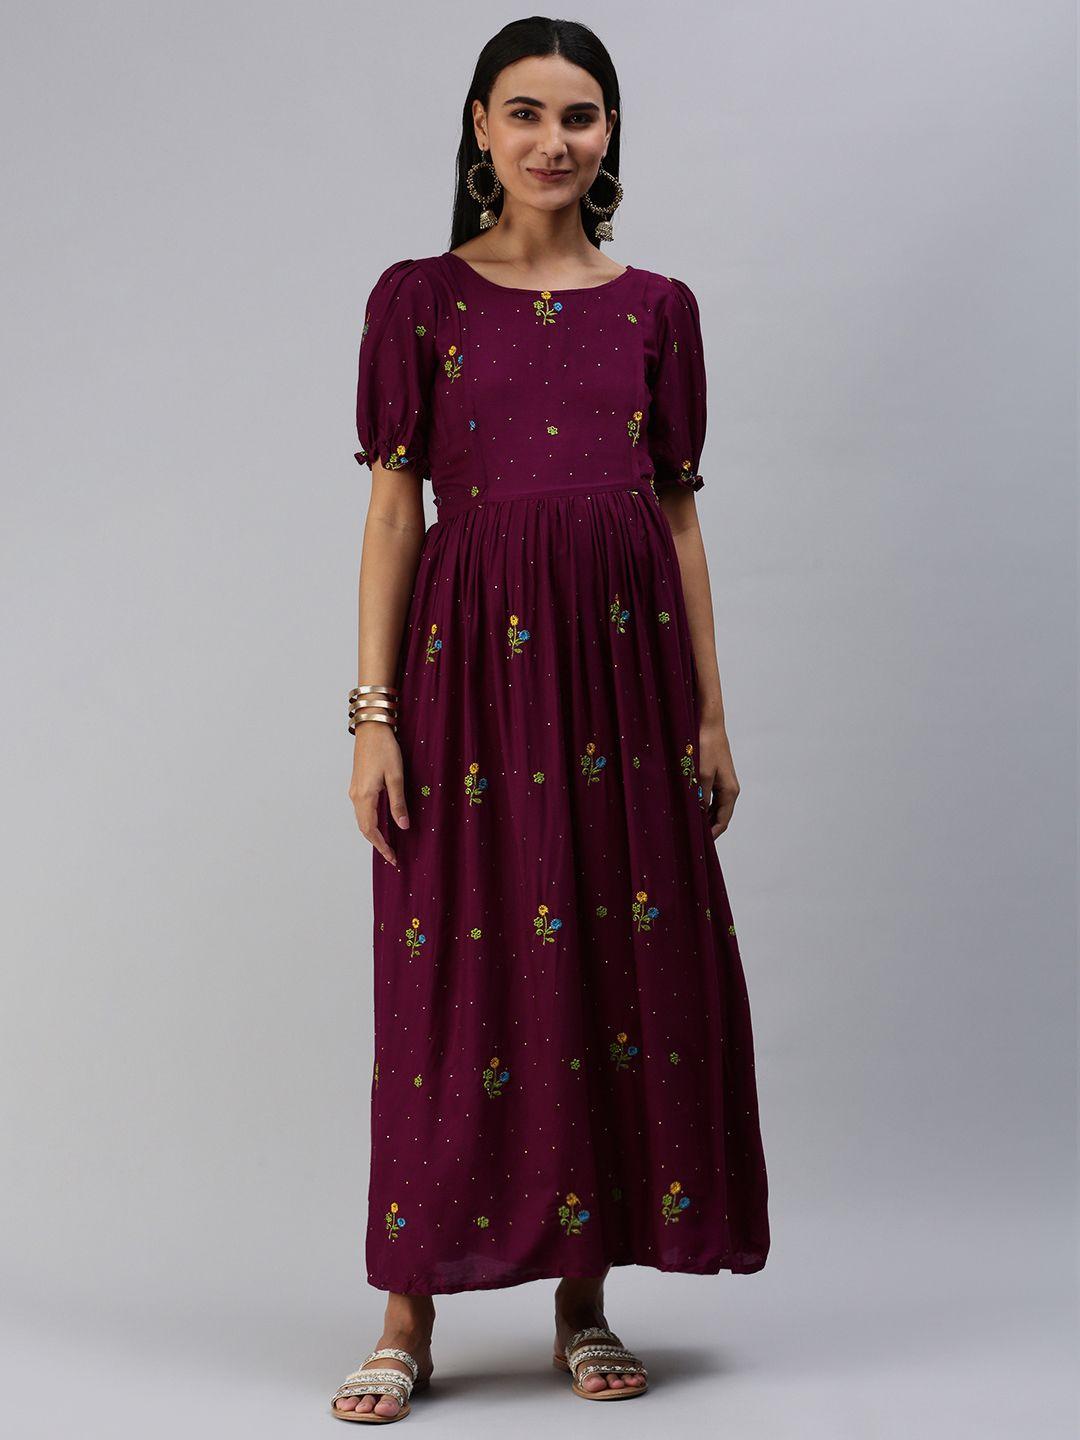 swishchick burgundy floral embroidered maternity maxi dress